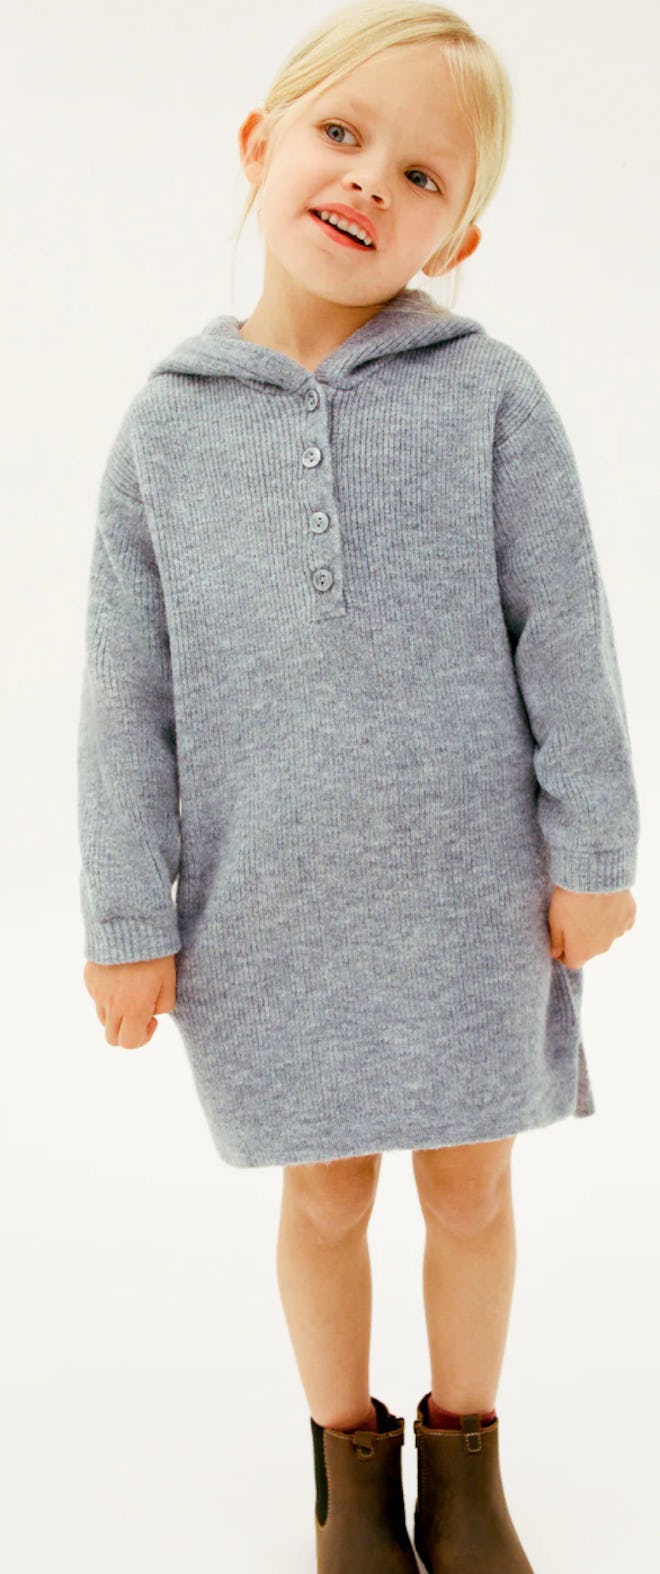 Image of a little girl wearing a gray hooded sweater dress.